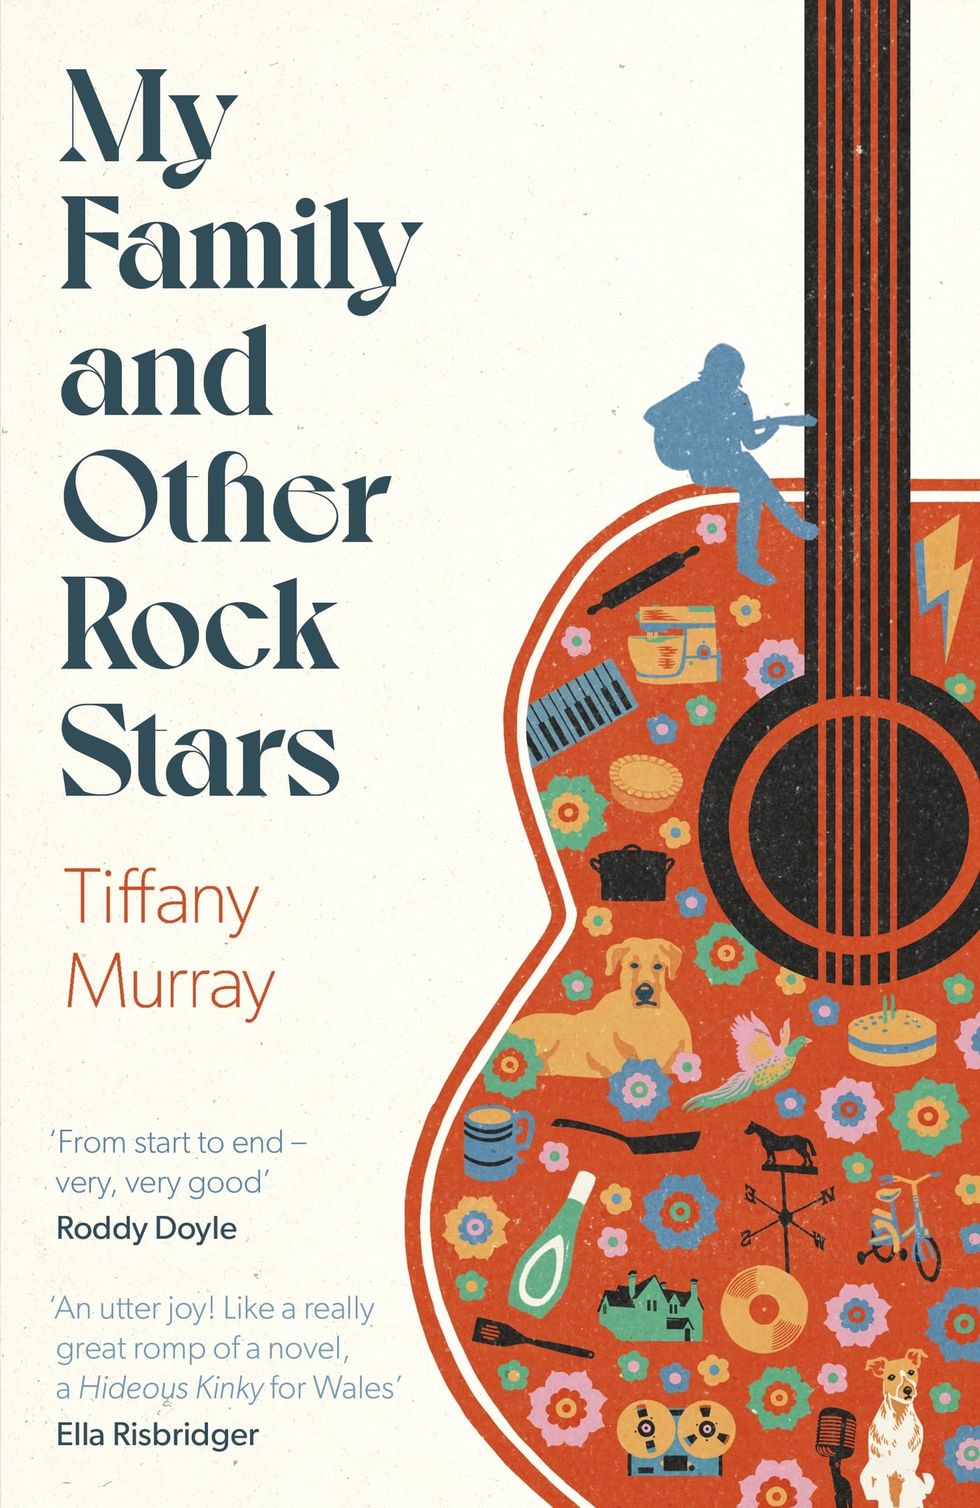 My Family and Another Rockstar by Tiffany Murray